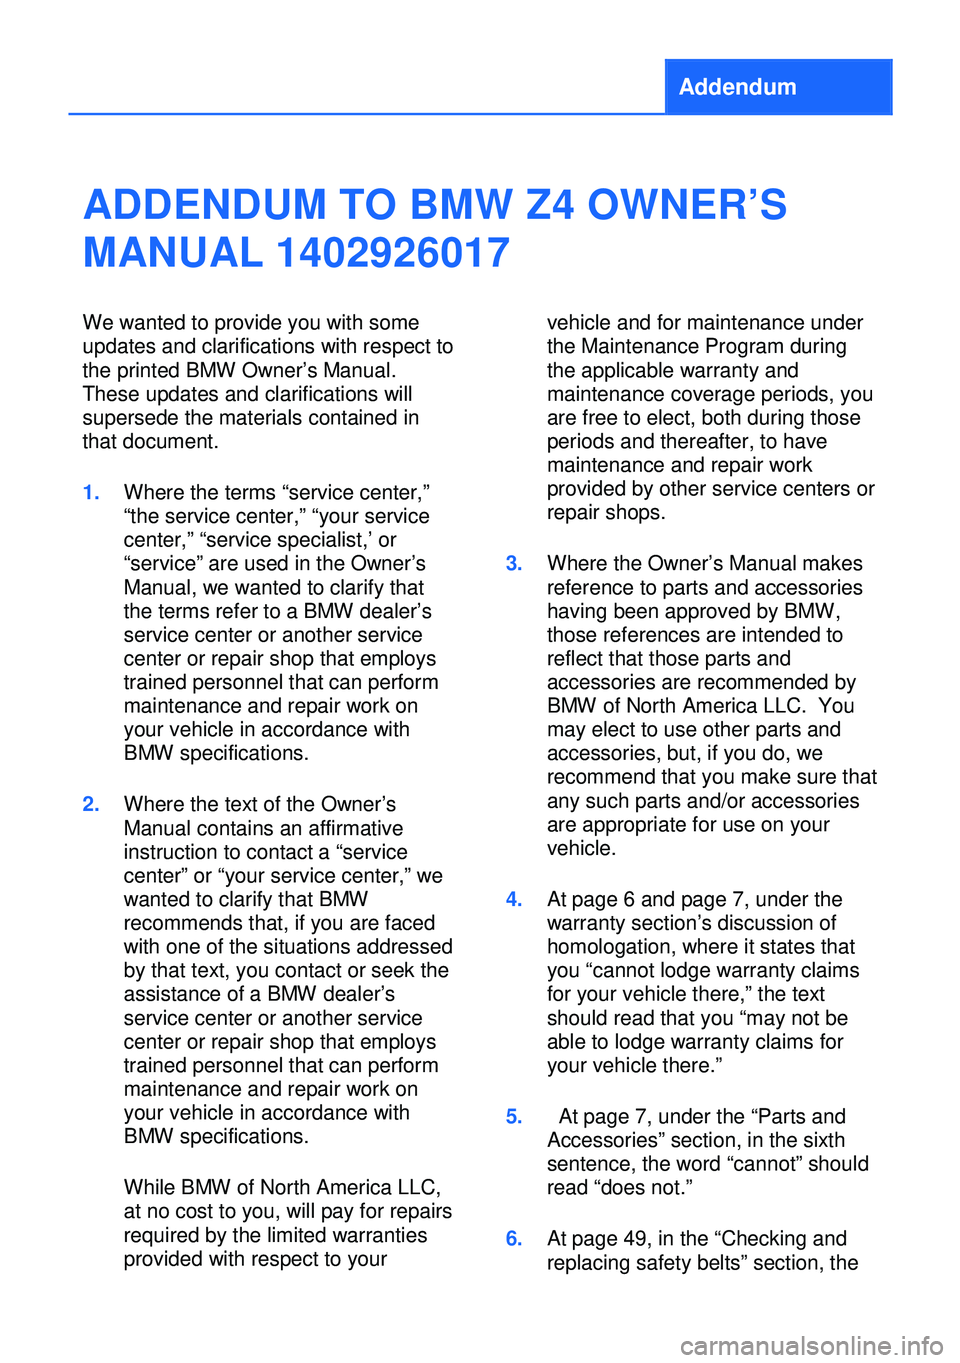 BMW Z4 2013 E89 Owners Manual Addendum
ADDENDUM TO BMW Z4 OWNER’S
MANUAL 1402926017
We wanted to provide you with some
updates and clarifications with respect to
the printed BMW Owner’s Manual.
These updates and clarifications